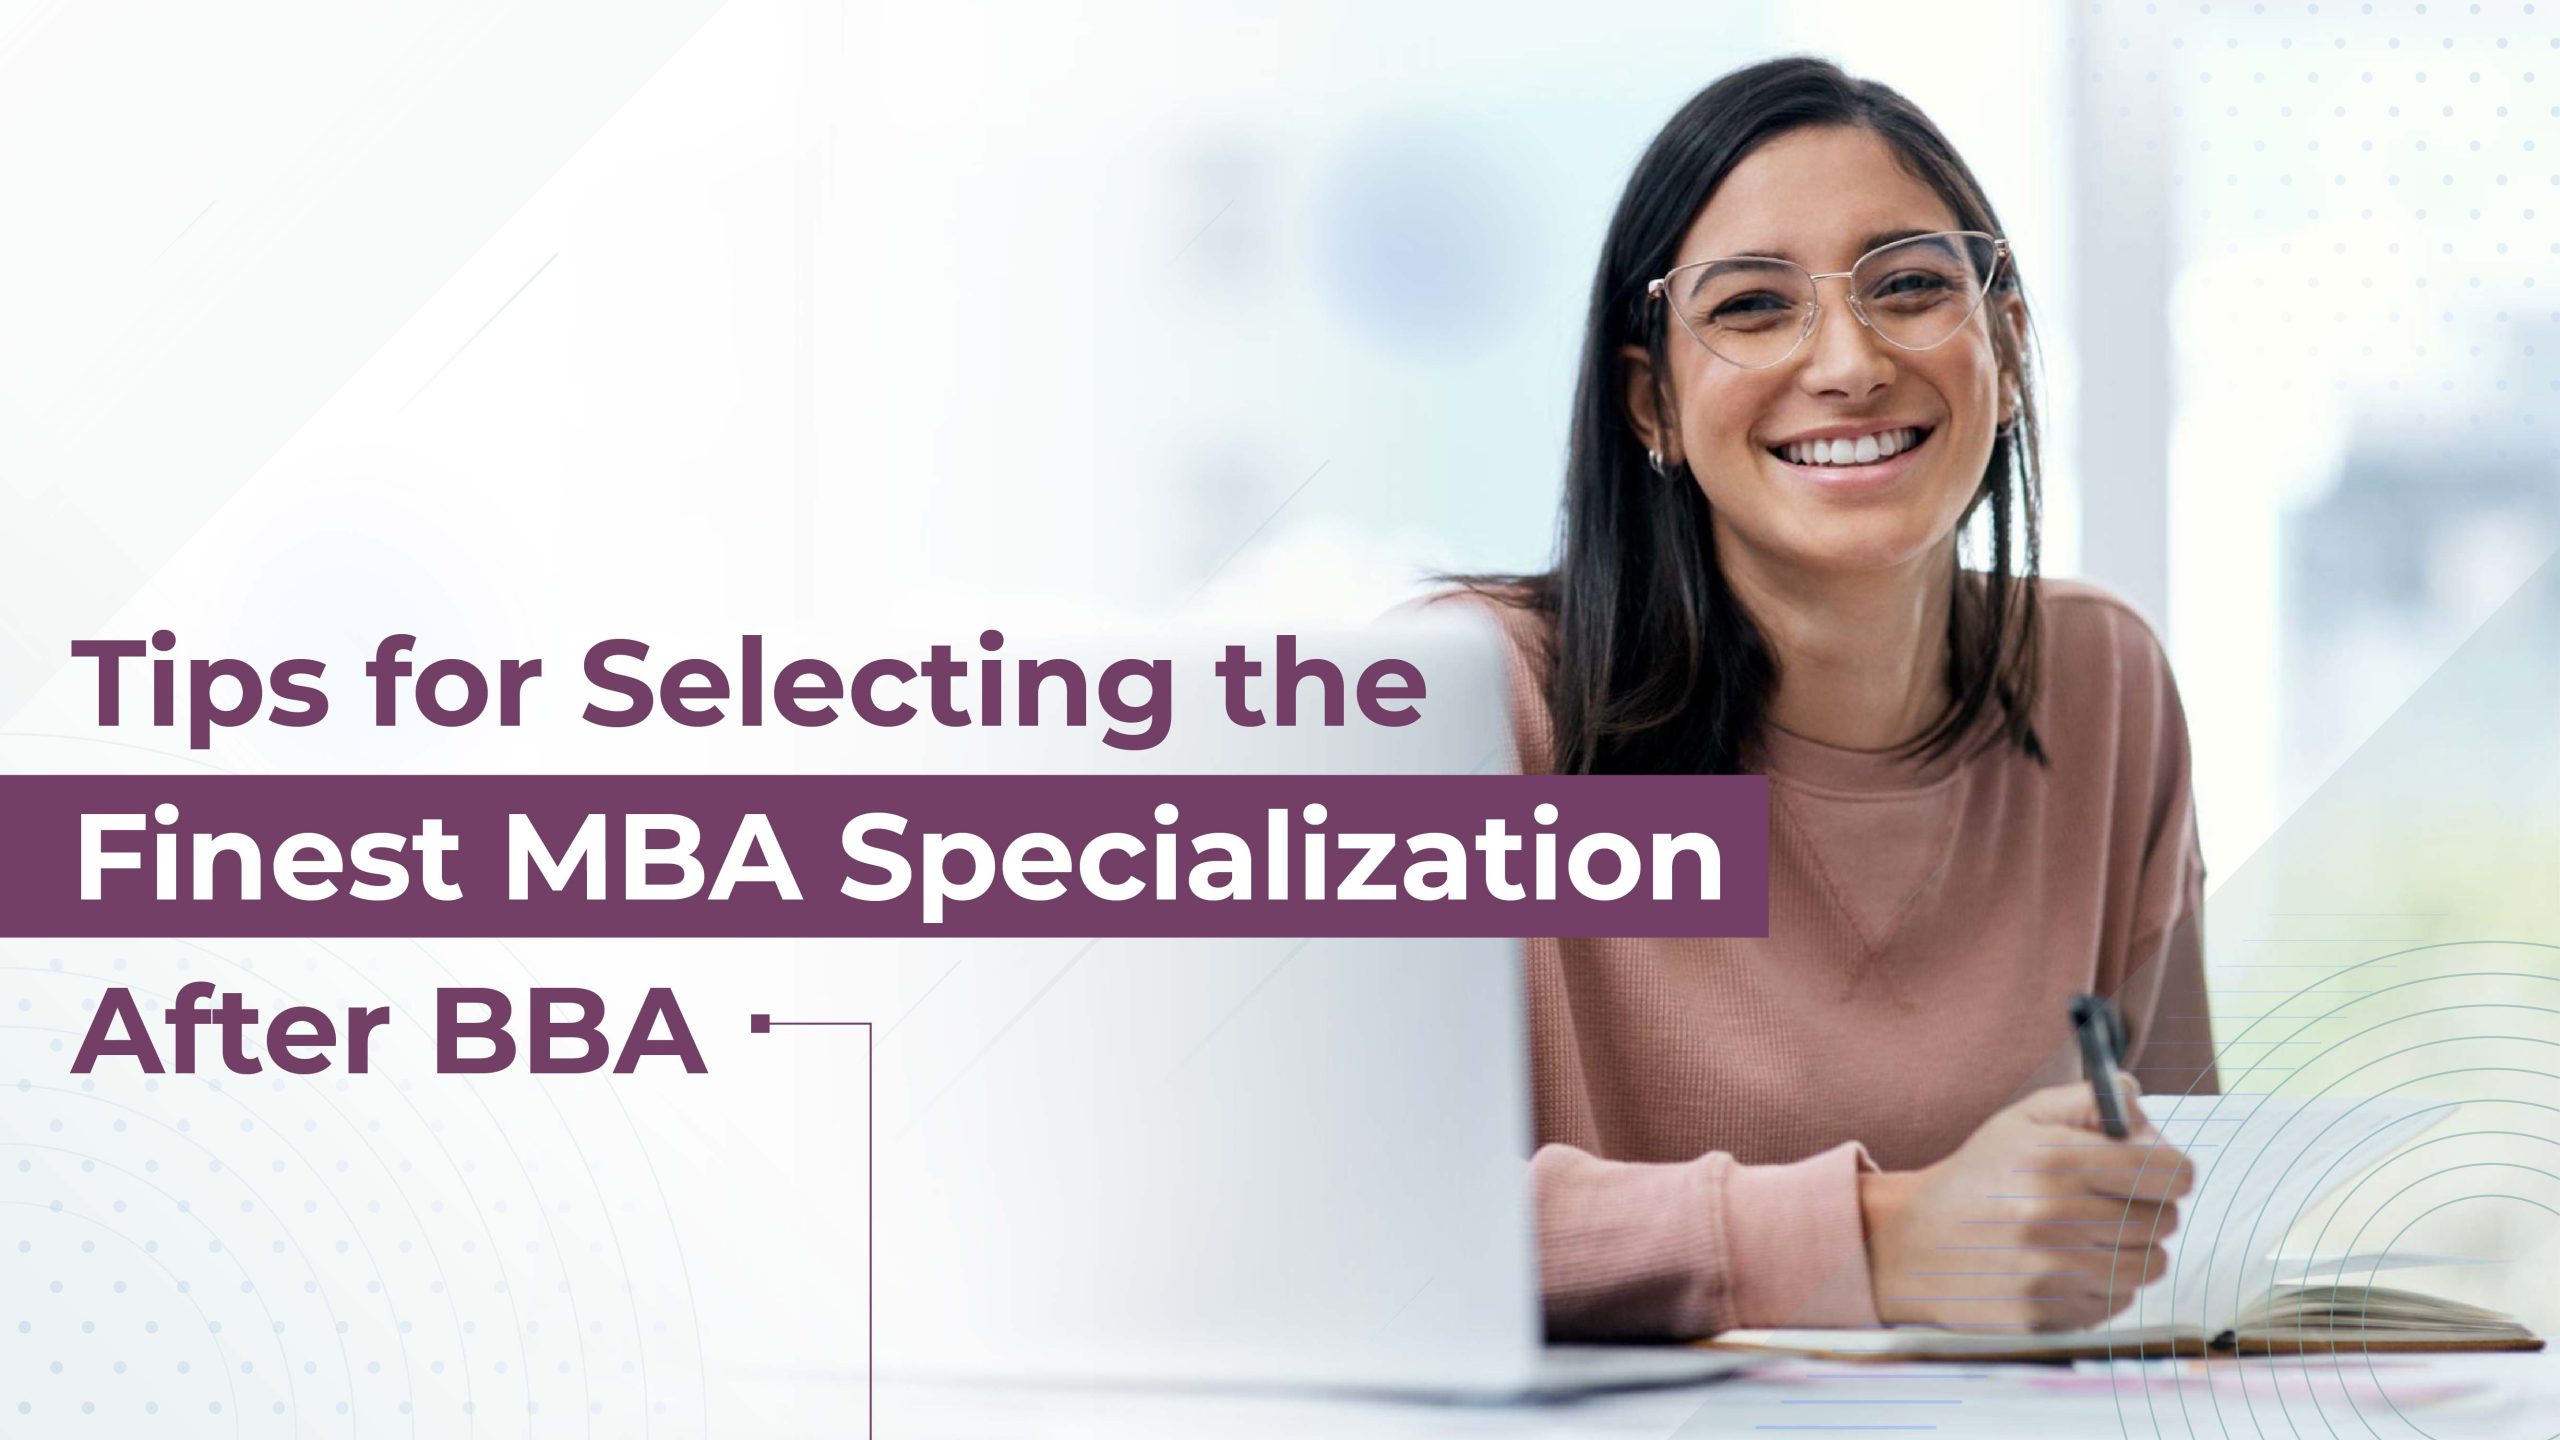 Tips for Selecting the Finest MBA Specialization After BBA